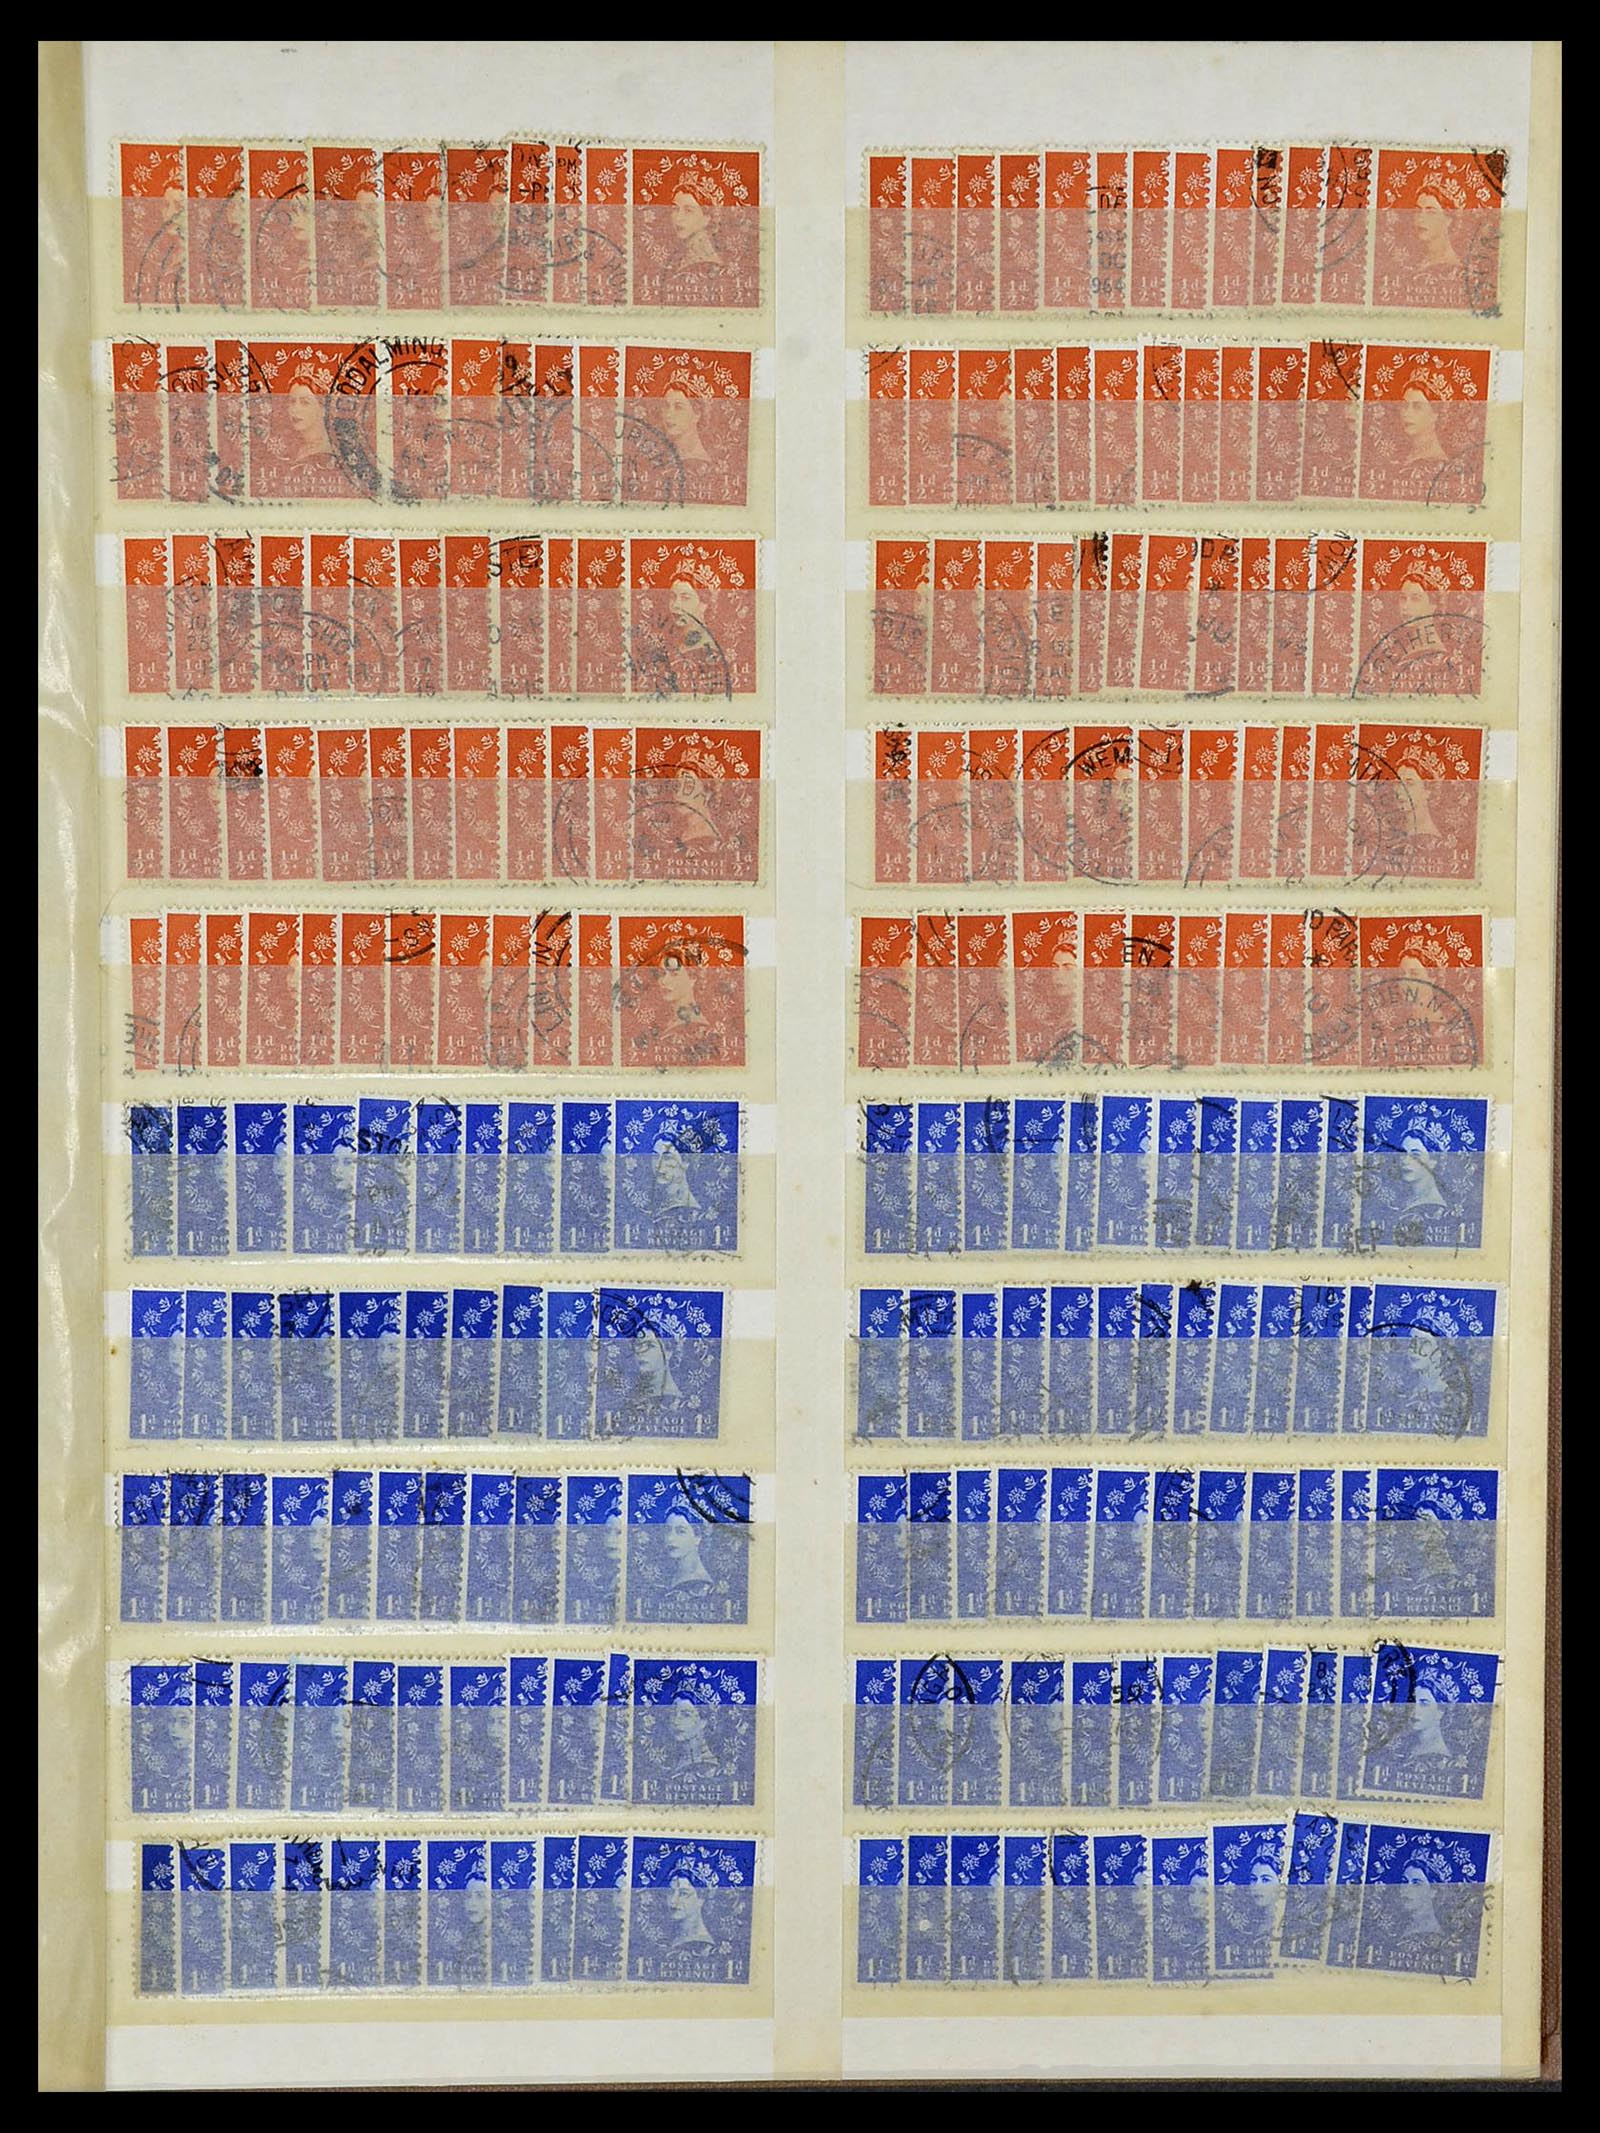 34368 078 - Stamp collection 34368 Great Britain sorting lot 1858-1990.